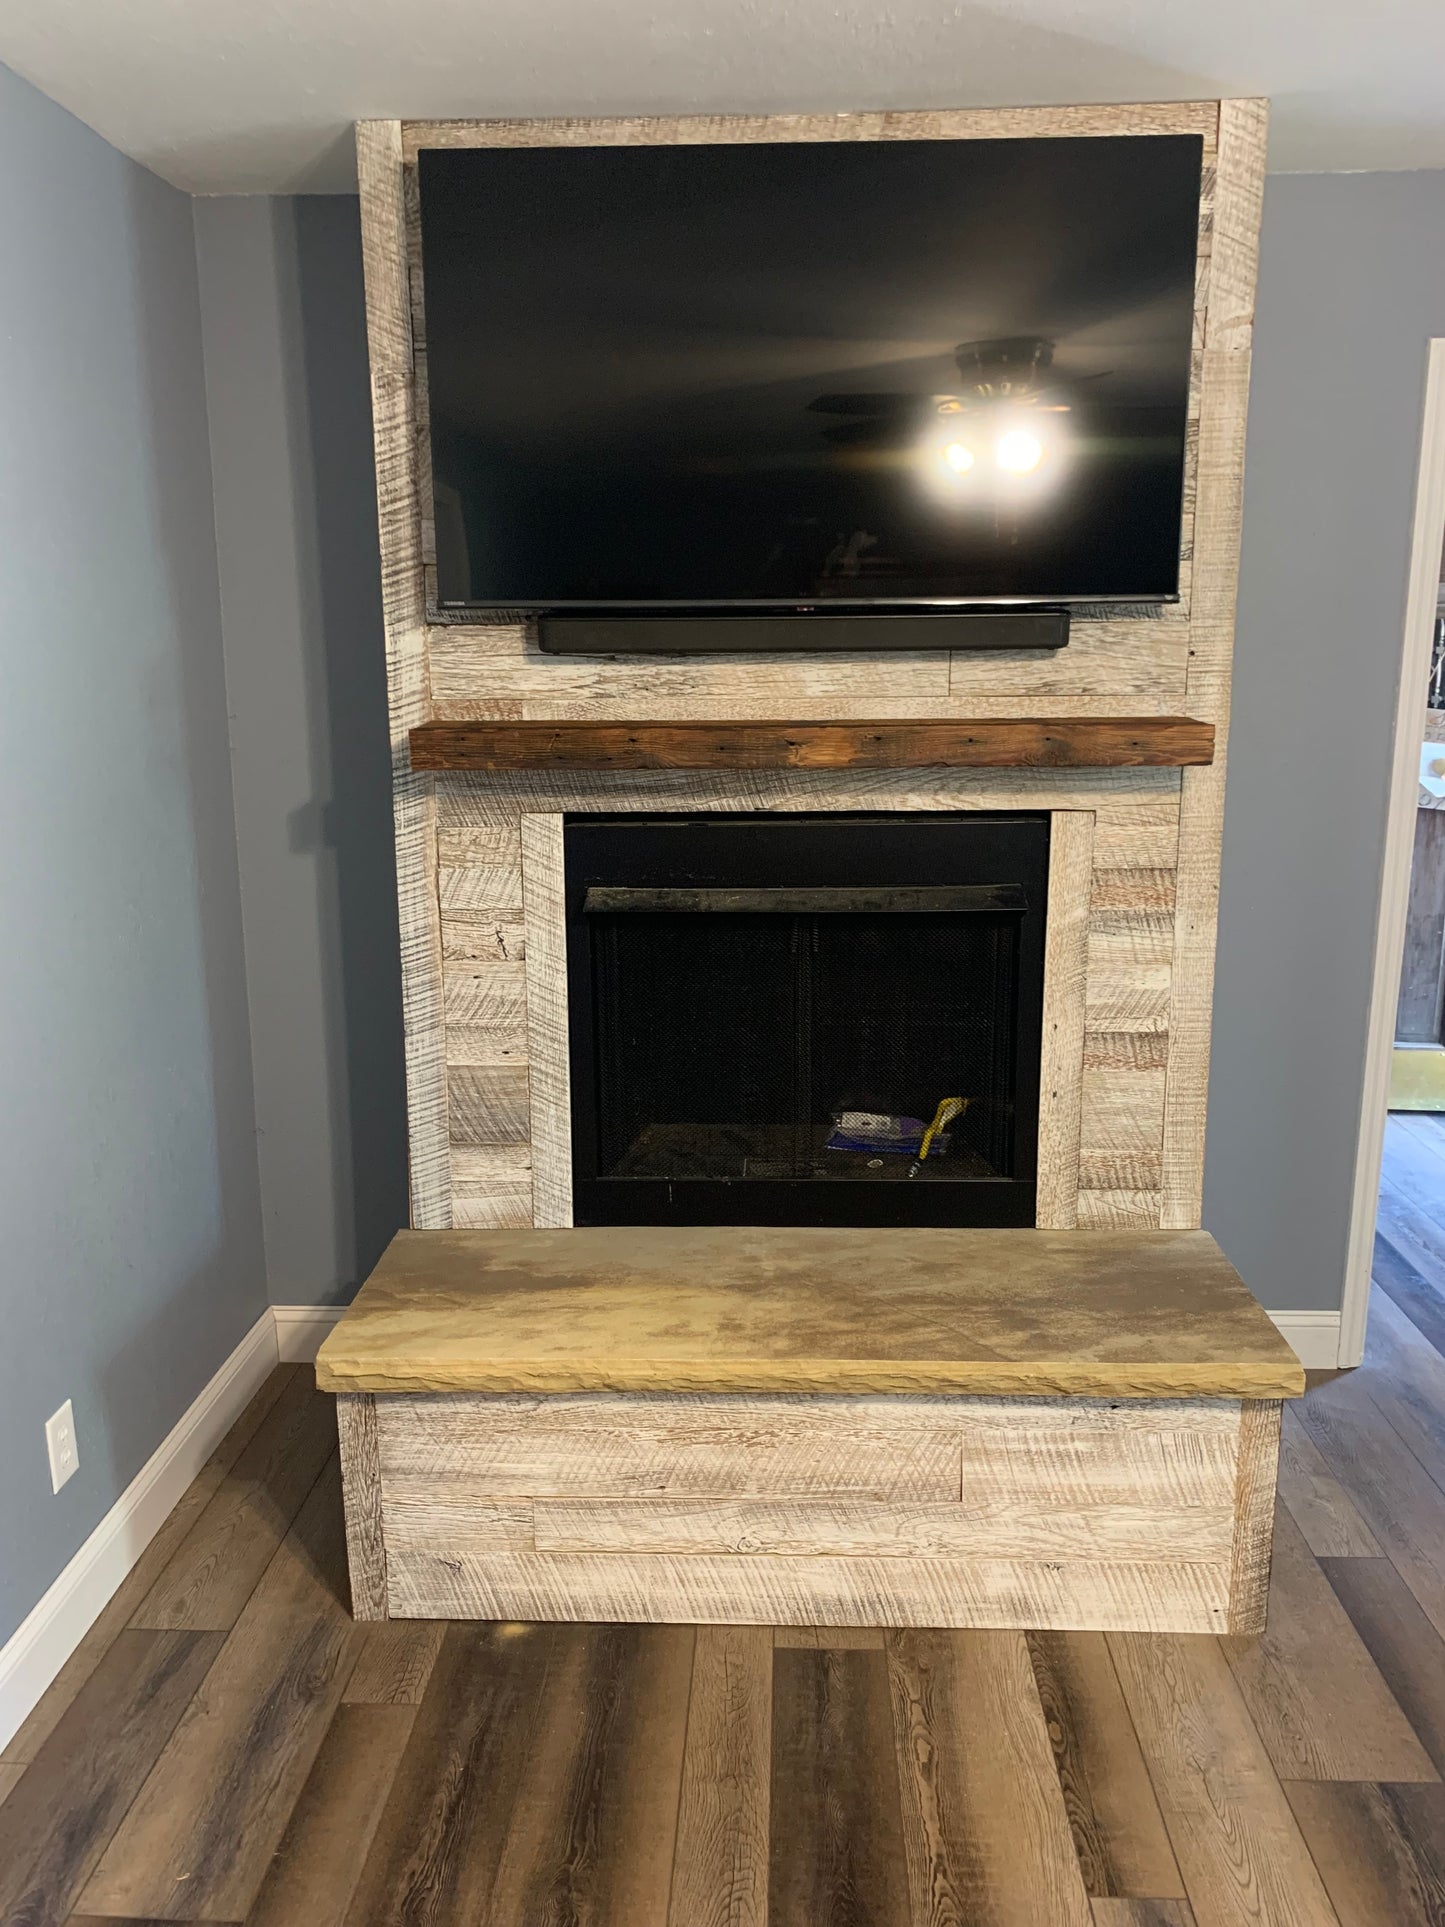 antique white reclaimed barnwood planks used to wrap a fireplace jut out. TV mounted towards the top with a reclaimed, oiled mantel underneath, and a fireplace opening under the mantel. Wood is brown with a white wash finish applied.